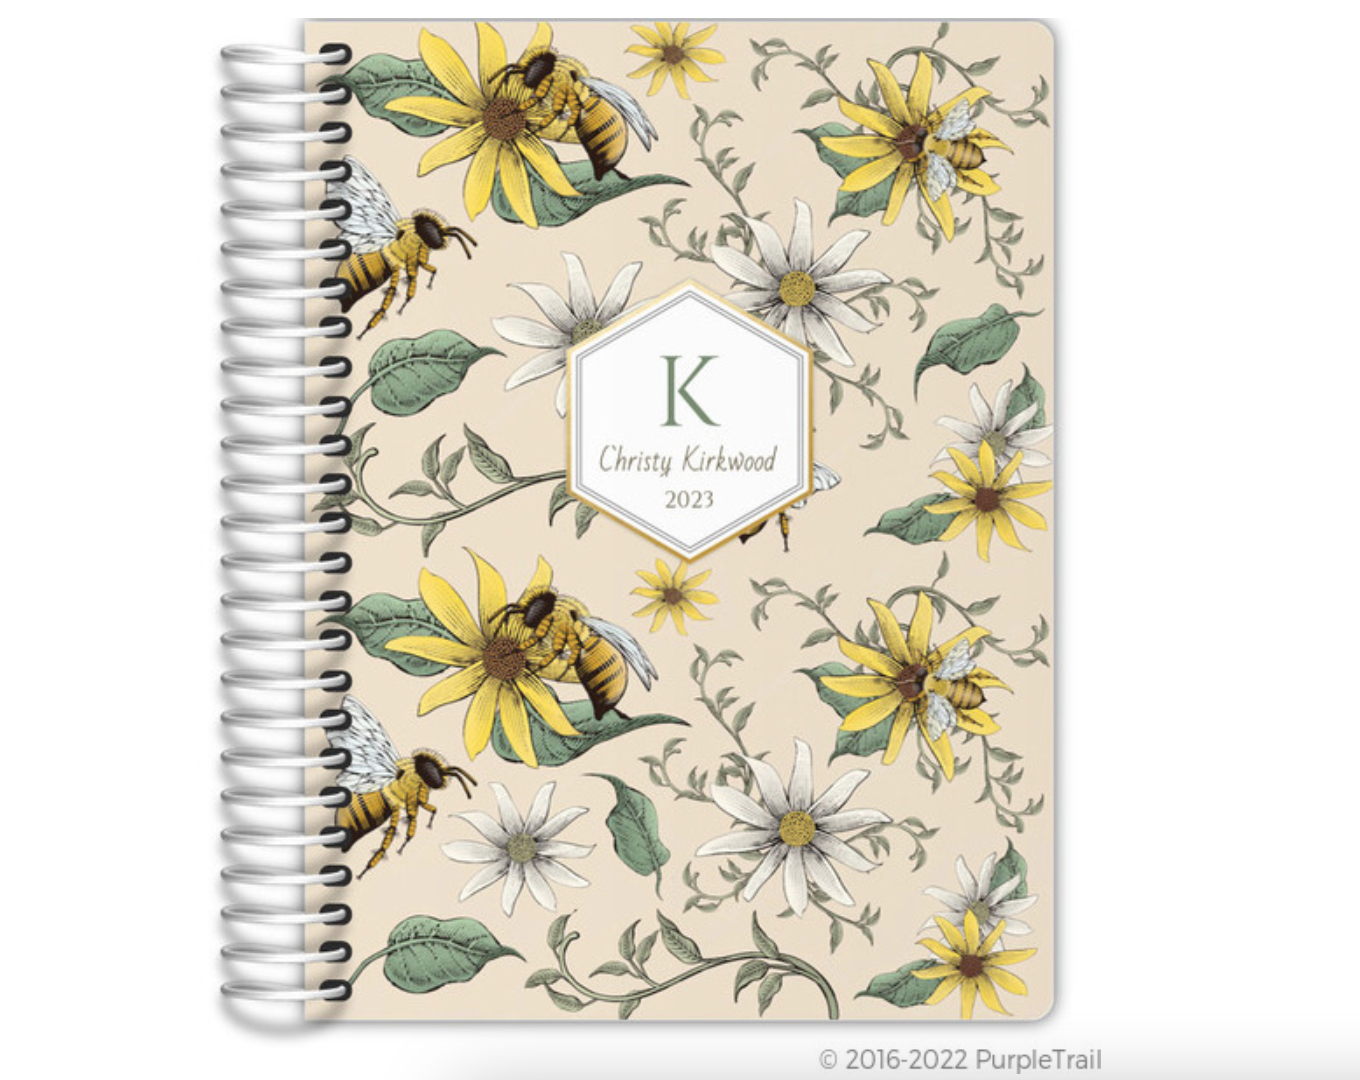 Spiral bound Purple Trail Daily Planner 2023 with yellow and green floral cover